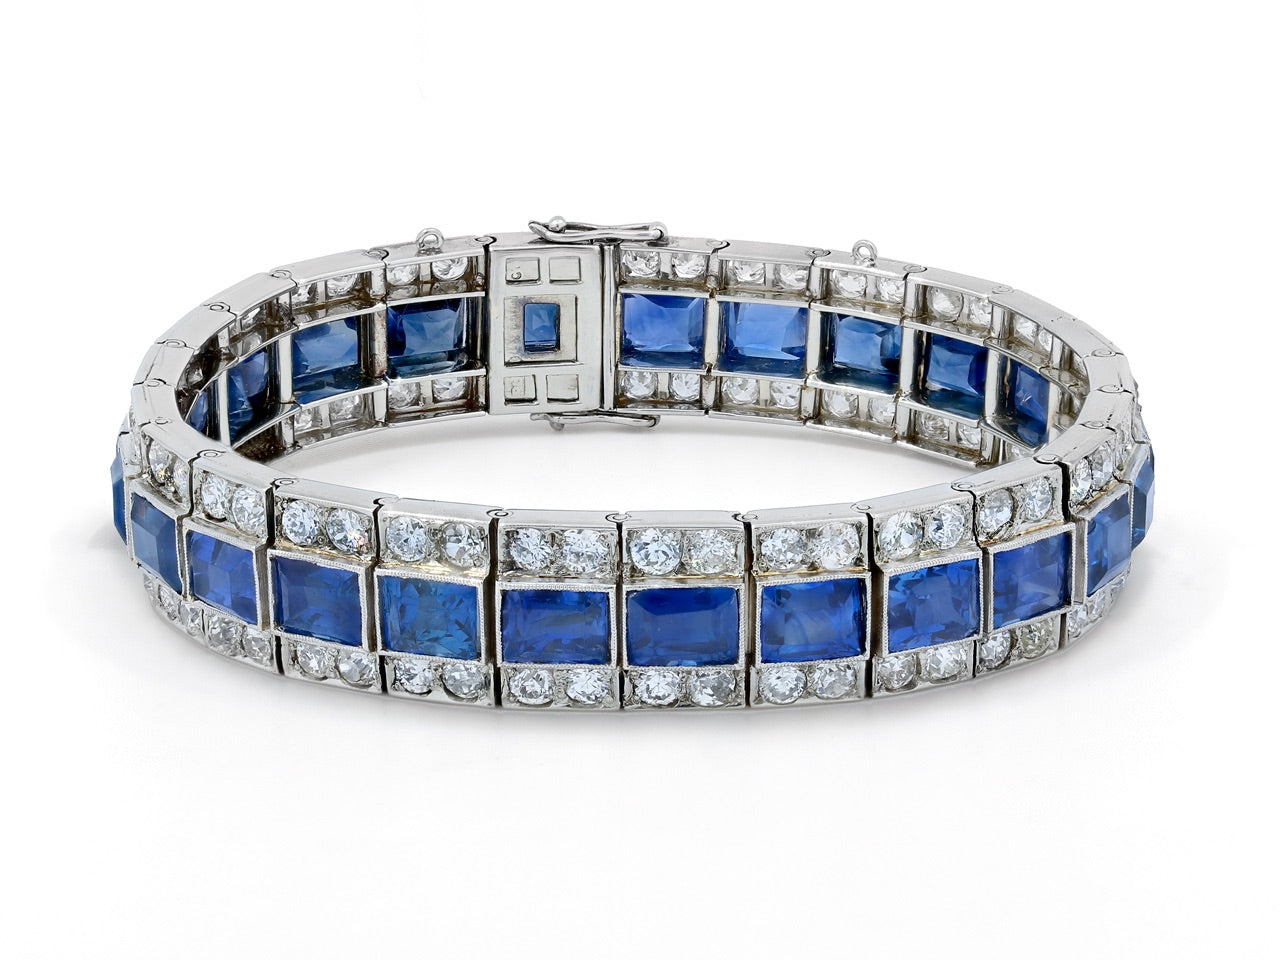 Art Deco Sapphire and Diamond Bracelet in Platinum and 18K White Gold